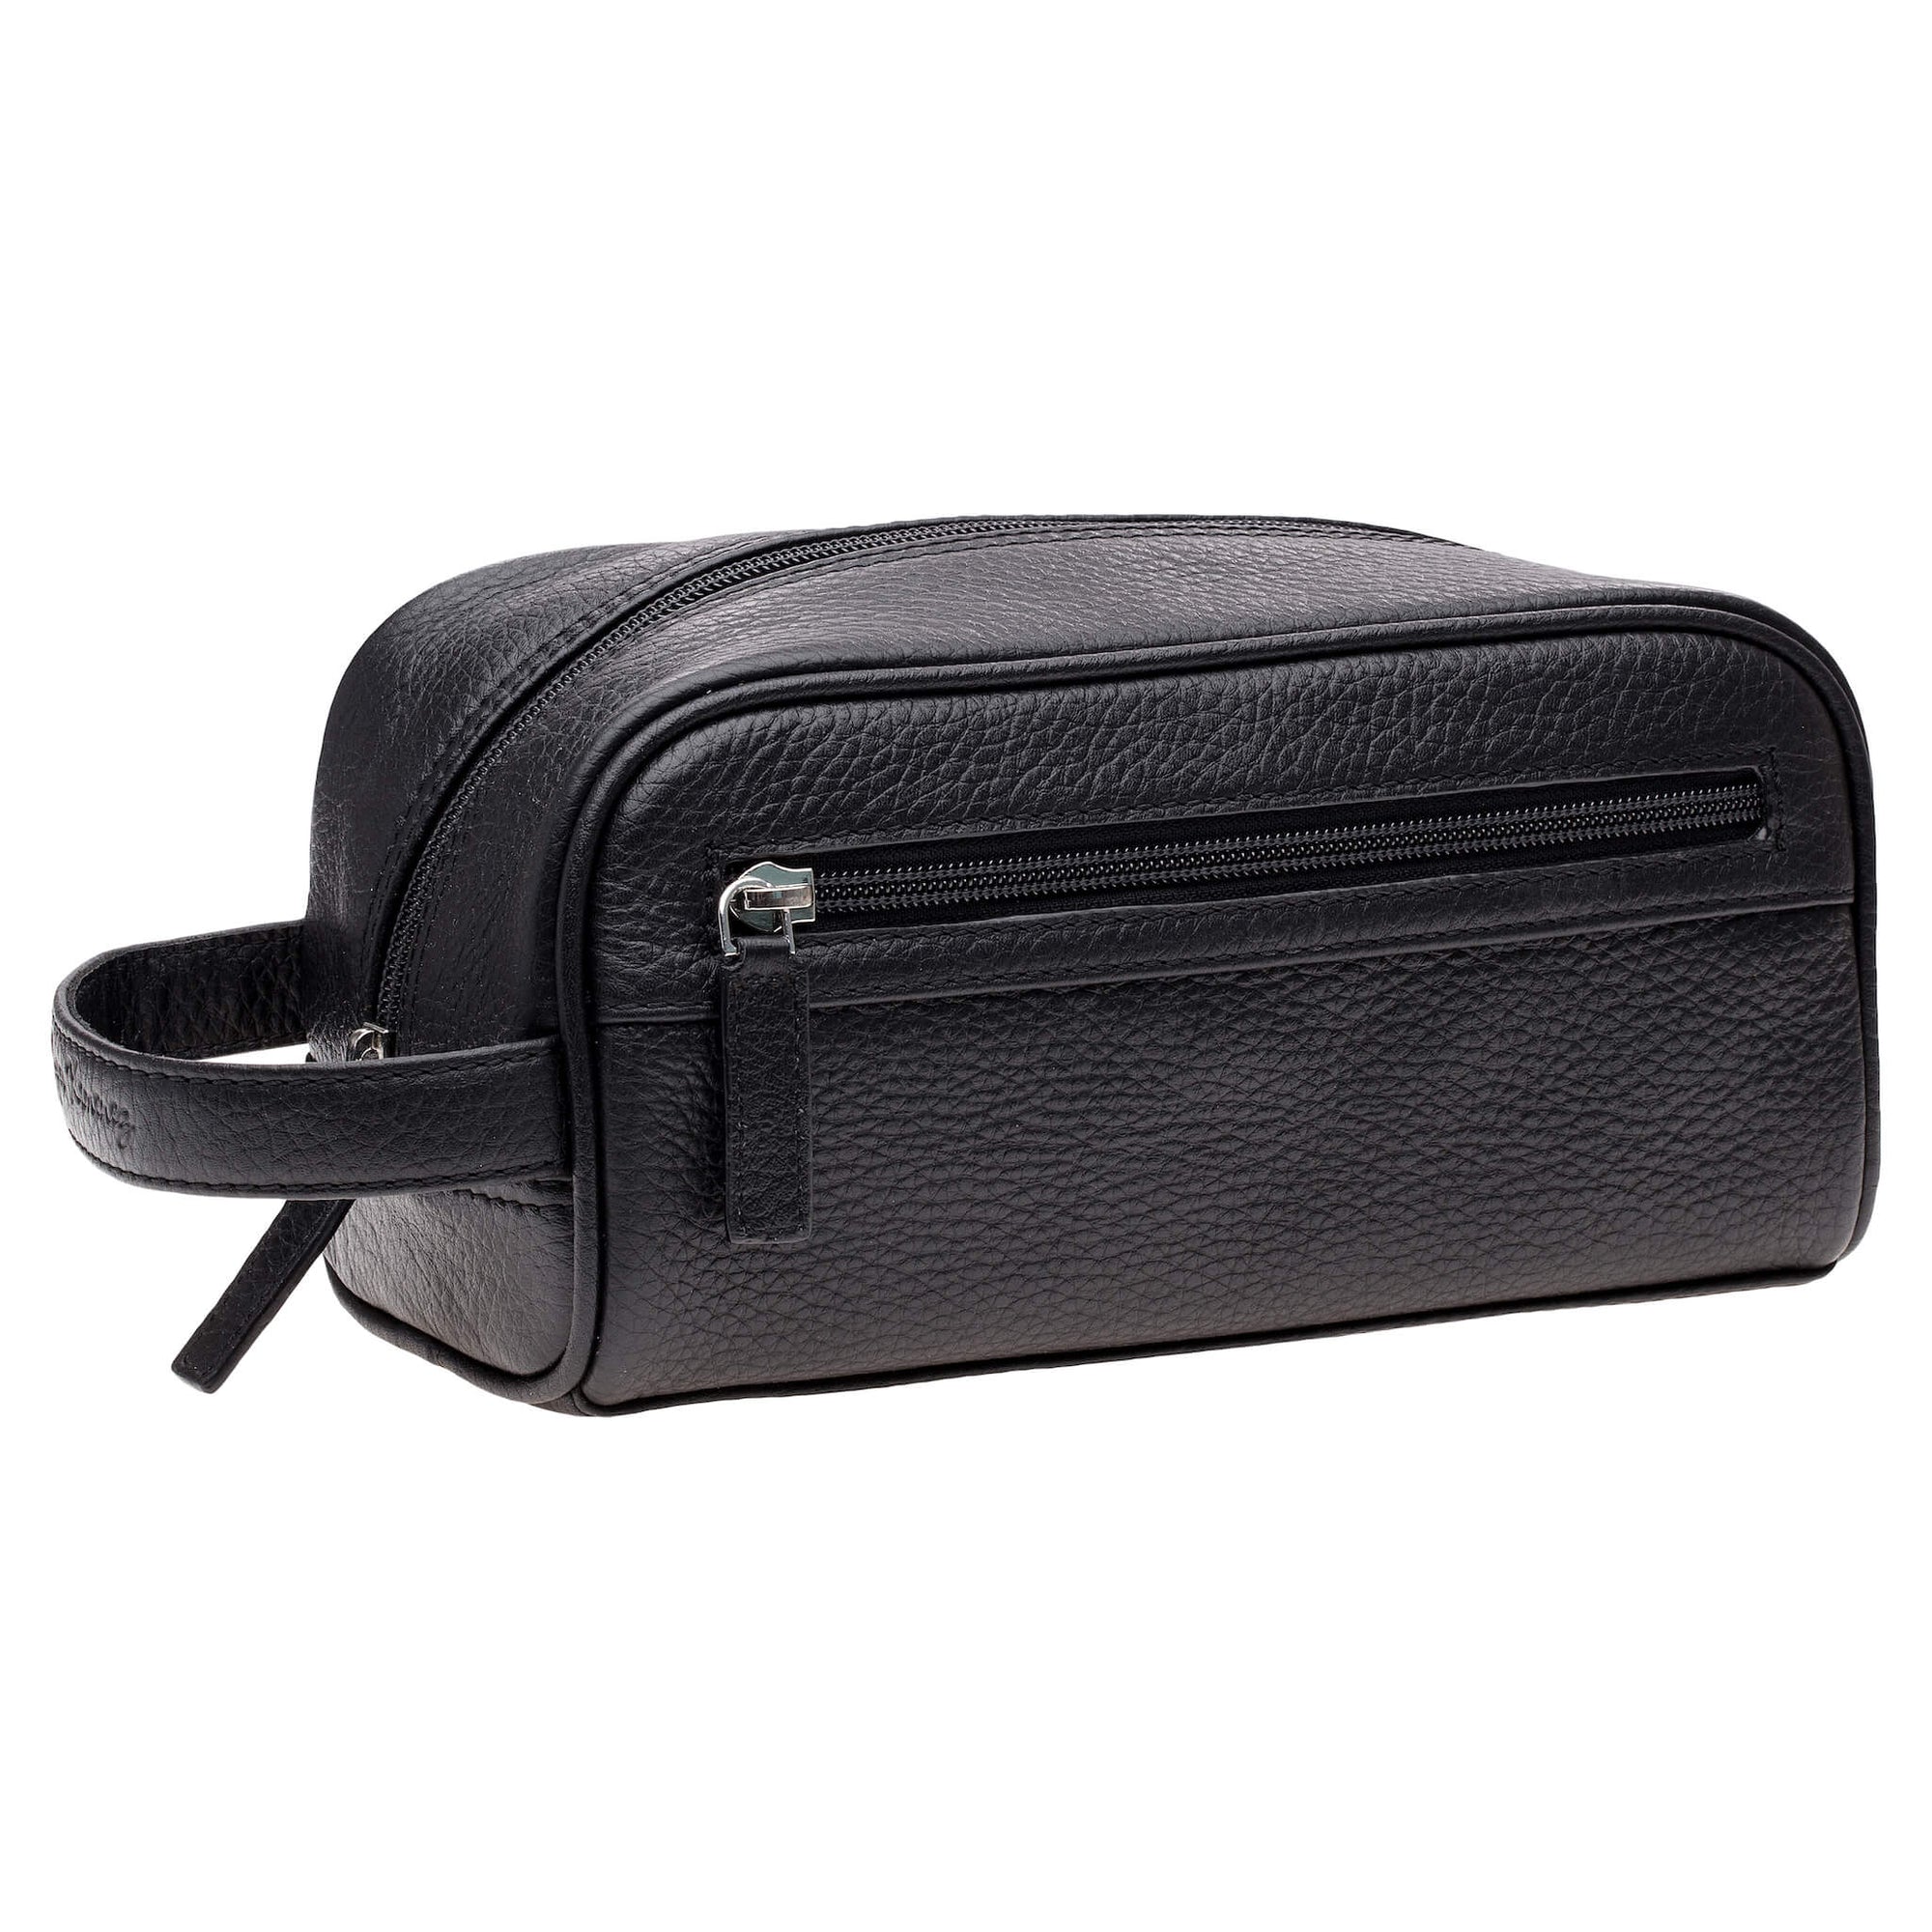 Black Leather Toiletry Bag - Roger Ximenez: Bespoke Belts and Leather ...